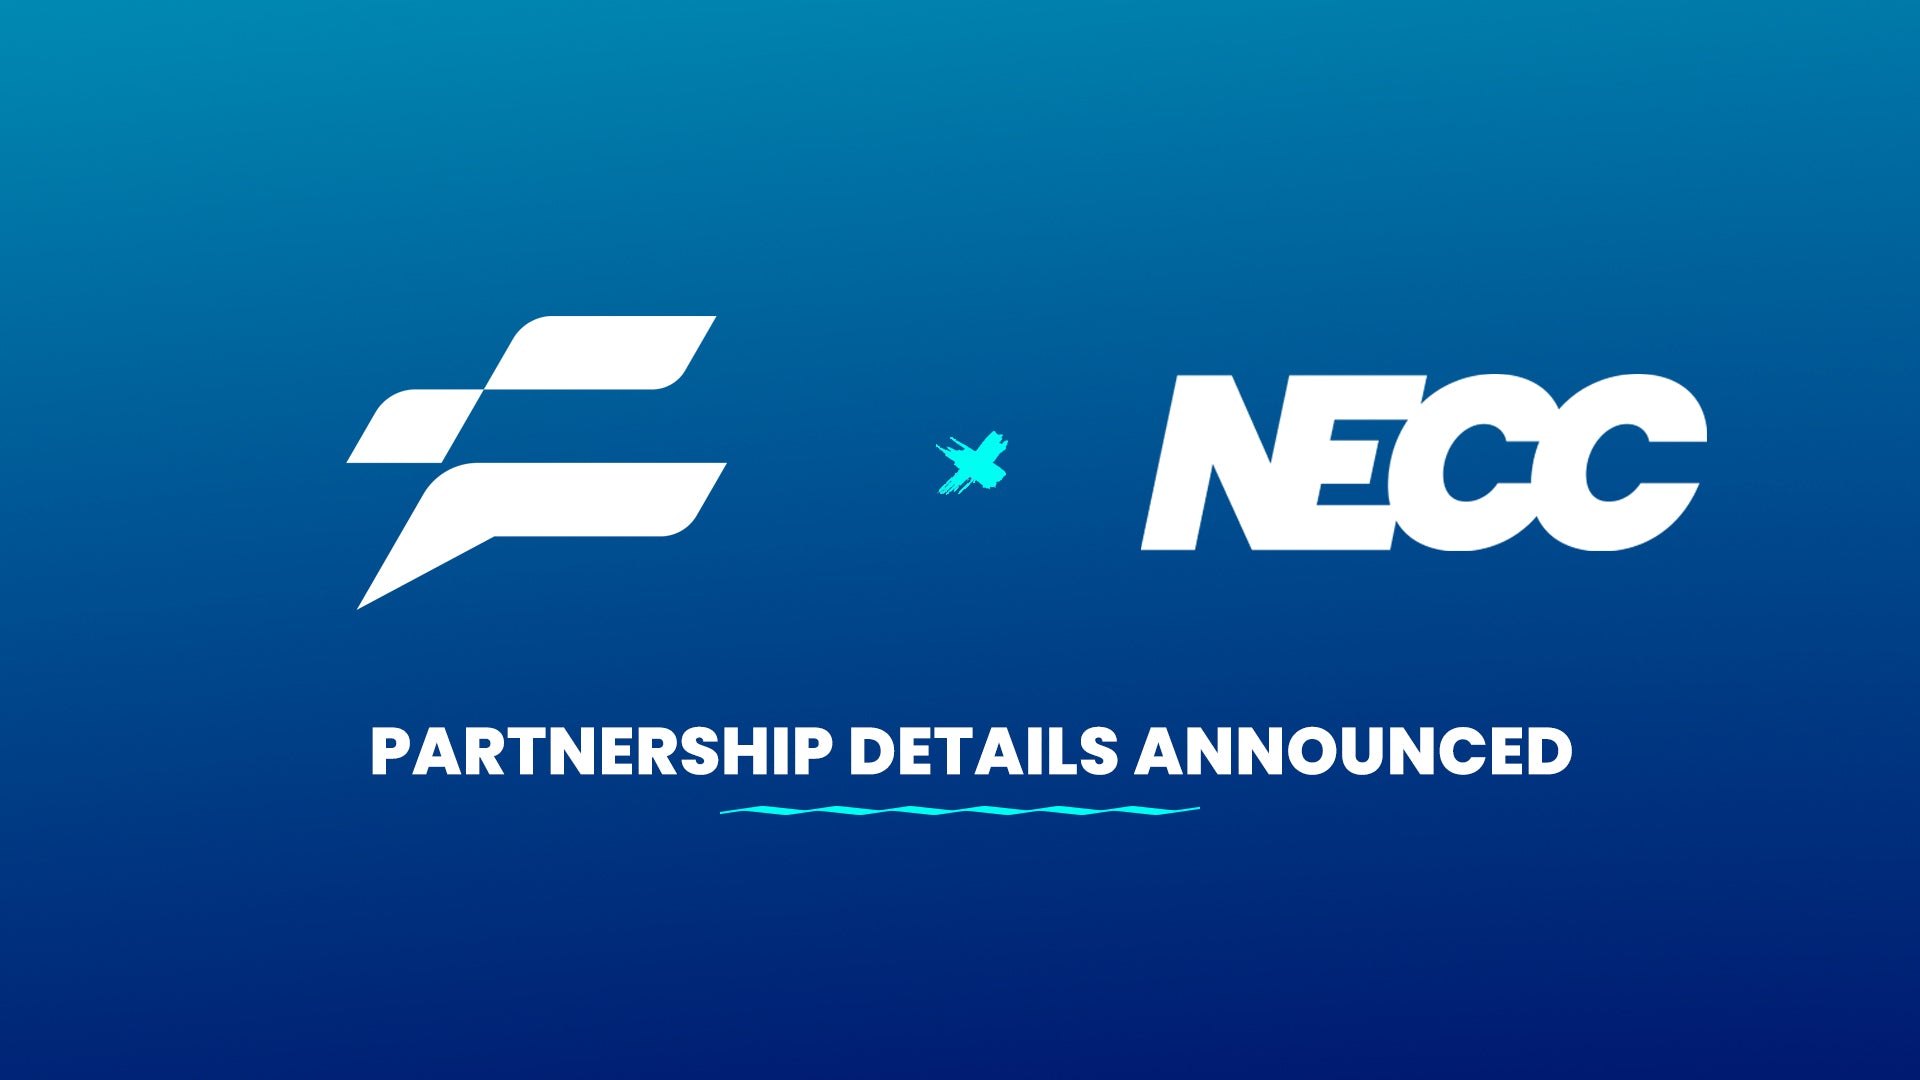 NECC Shares More Information about Partnership with FITGMR, Including Health and Wellness Webinar Series and Giveaway Opportunities